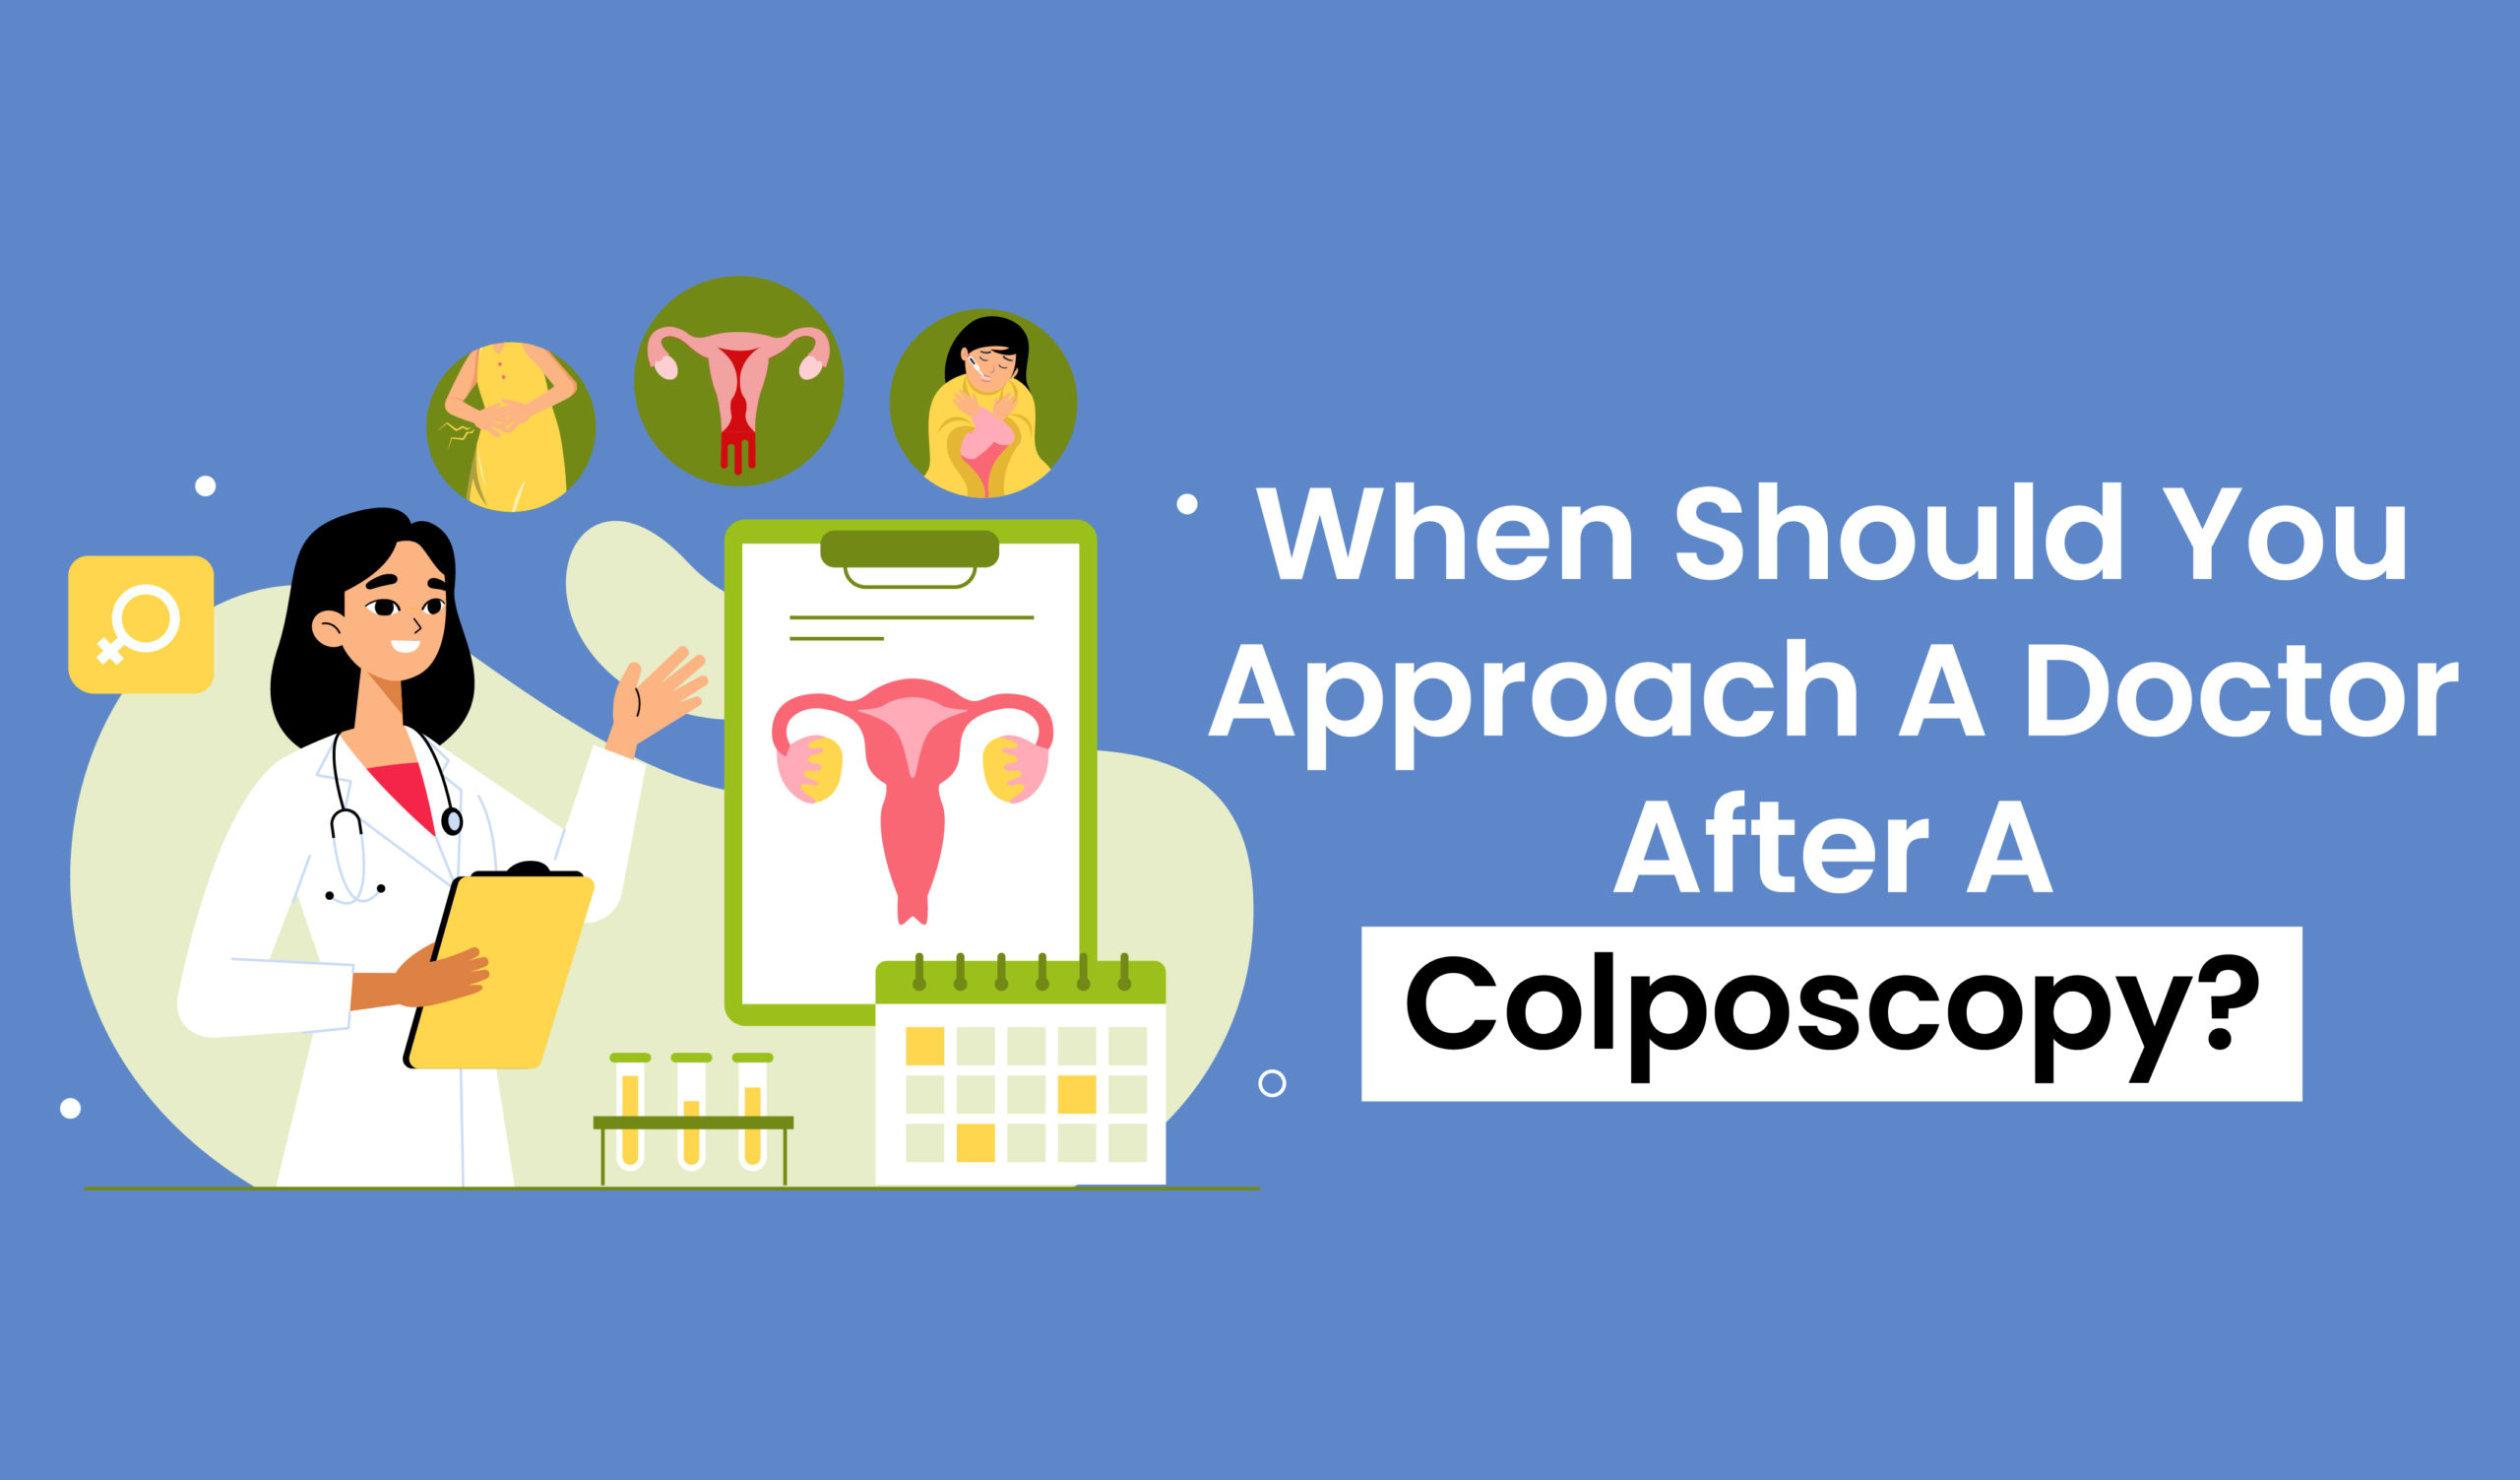 When should you approach a doctor after a colposcopy